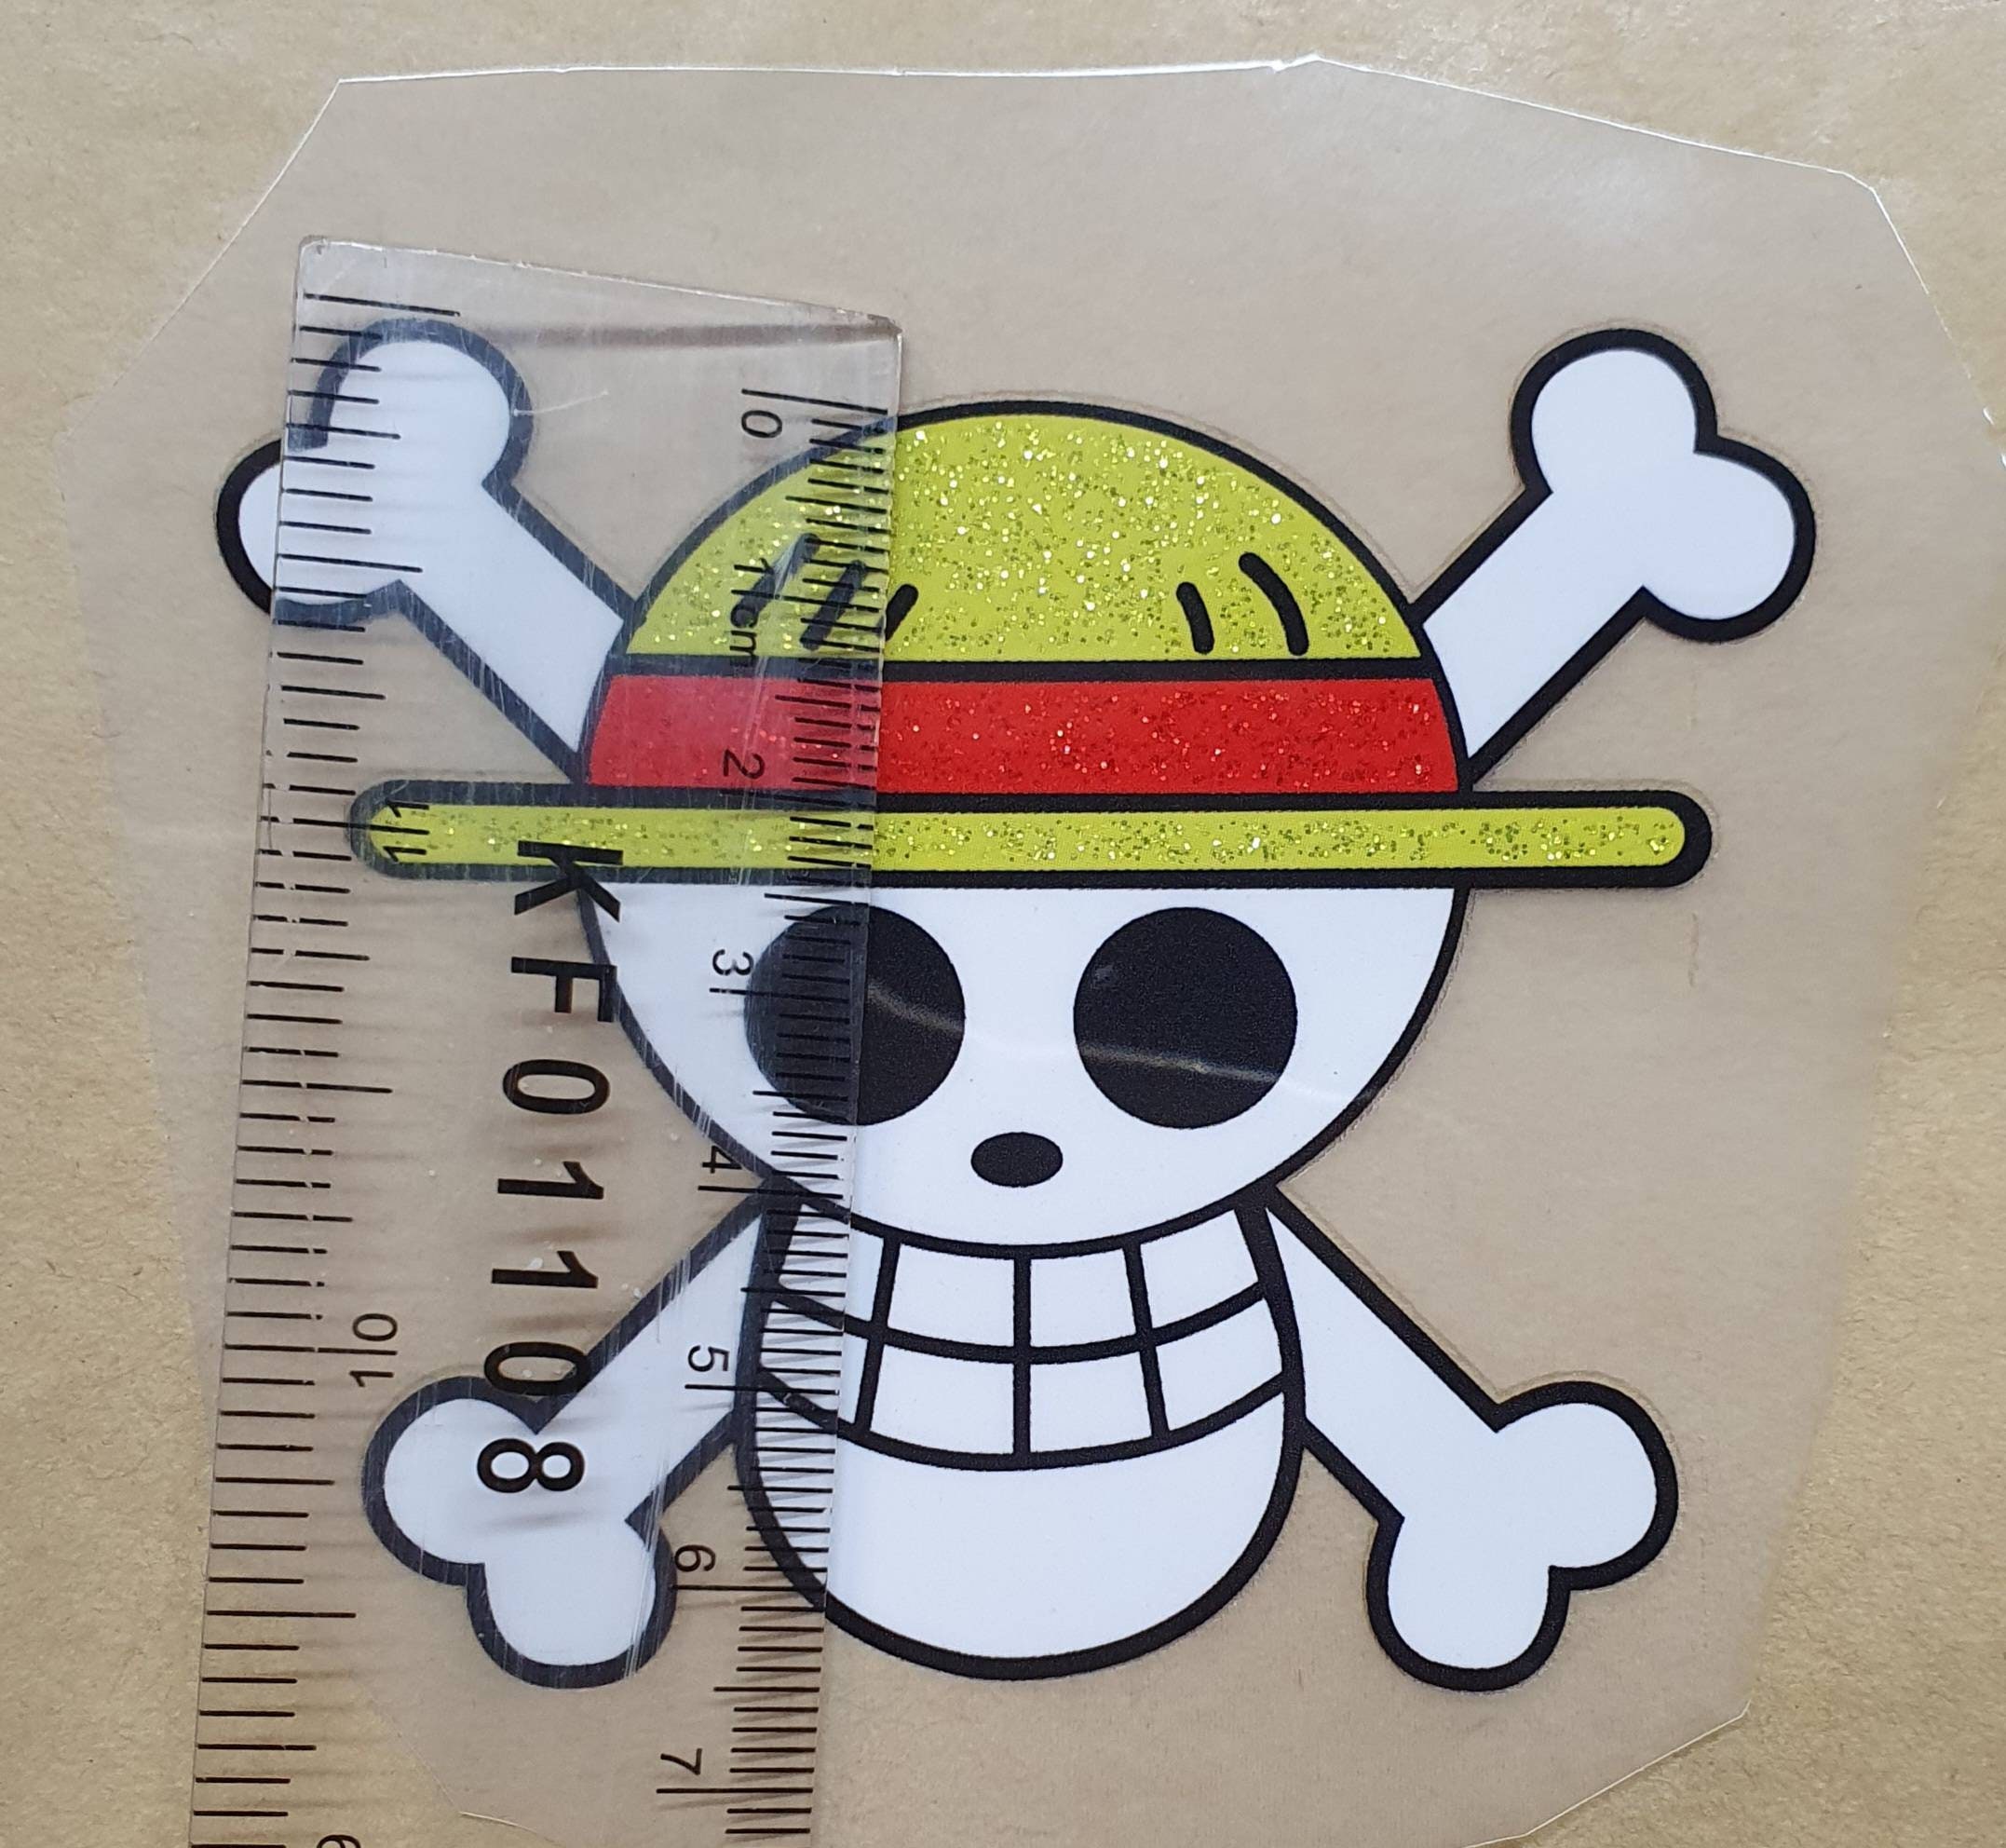  Embroidered Patches Straw Hat Skull & Bones Anime Figure for  Pirate Fans One Piece Applique Sew On Iron on Patch Kids DIY Embroidery  Sticker for Bags Jackets Jeans Shirt Cap(70 *